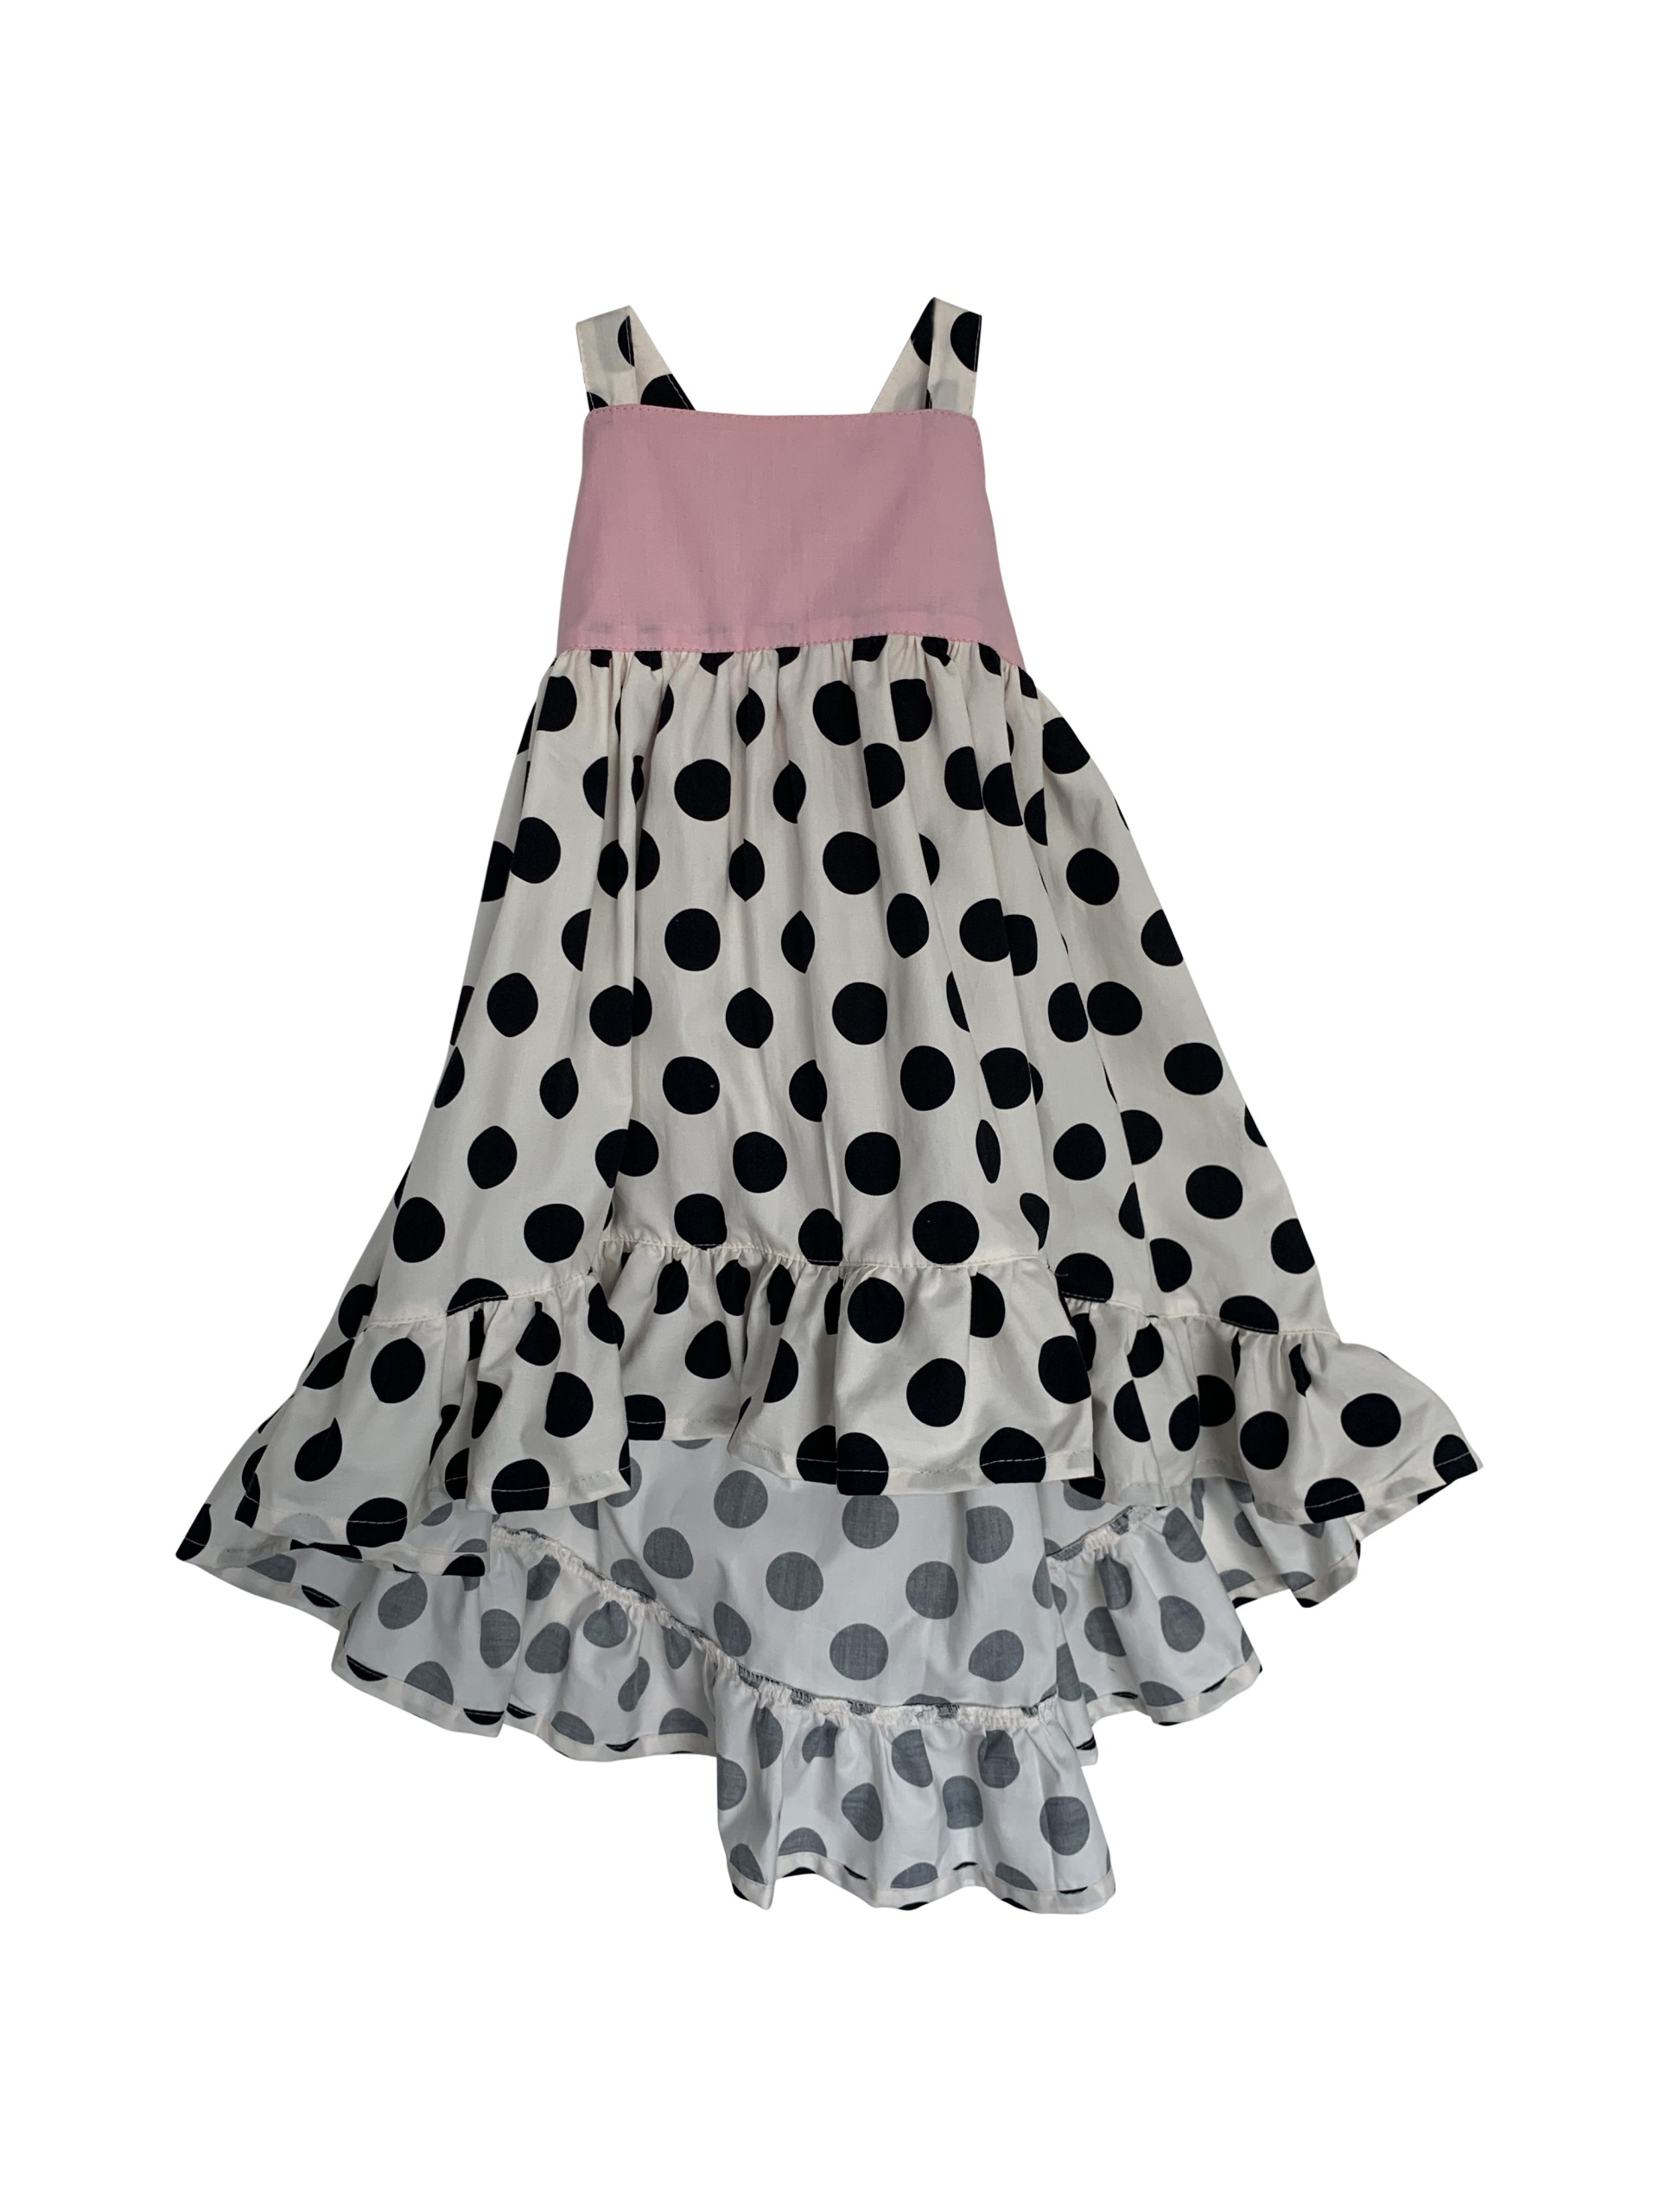 Ivory with black dots and pink dress